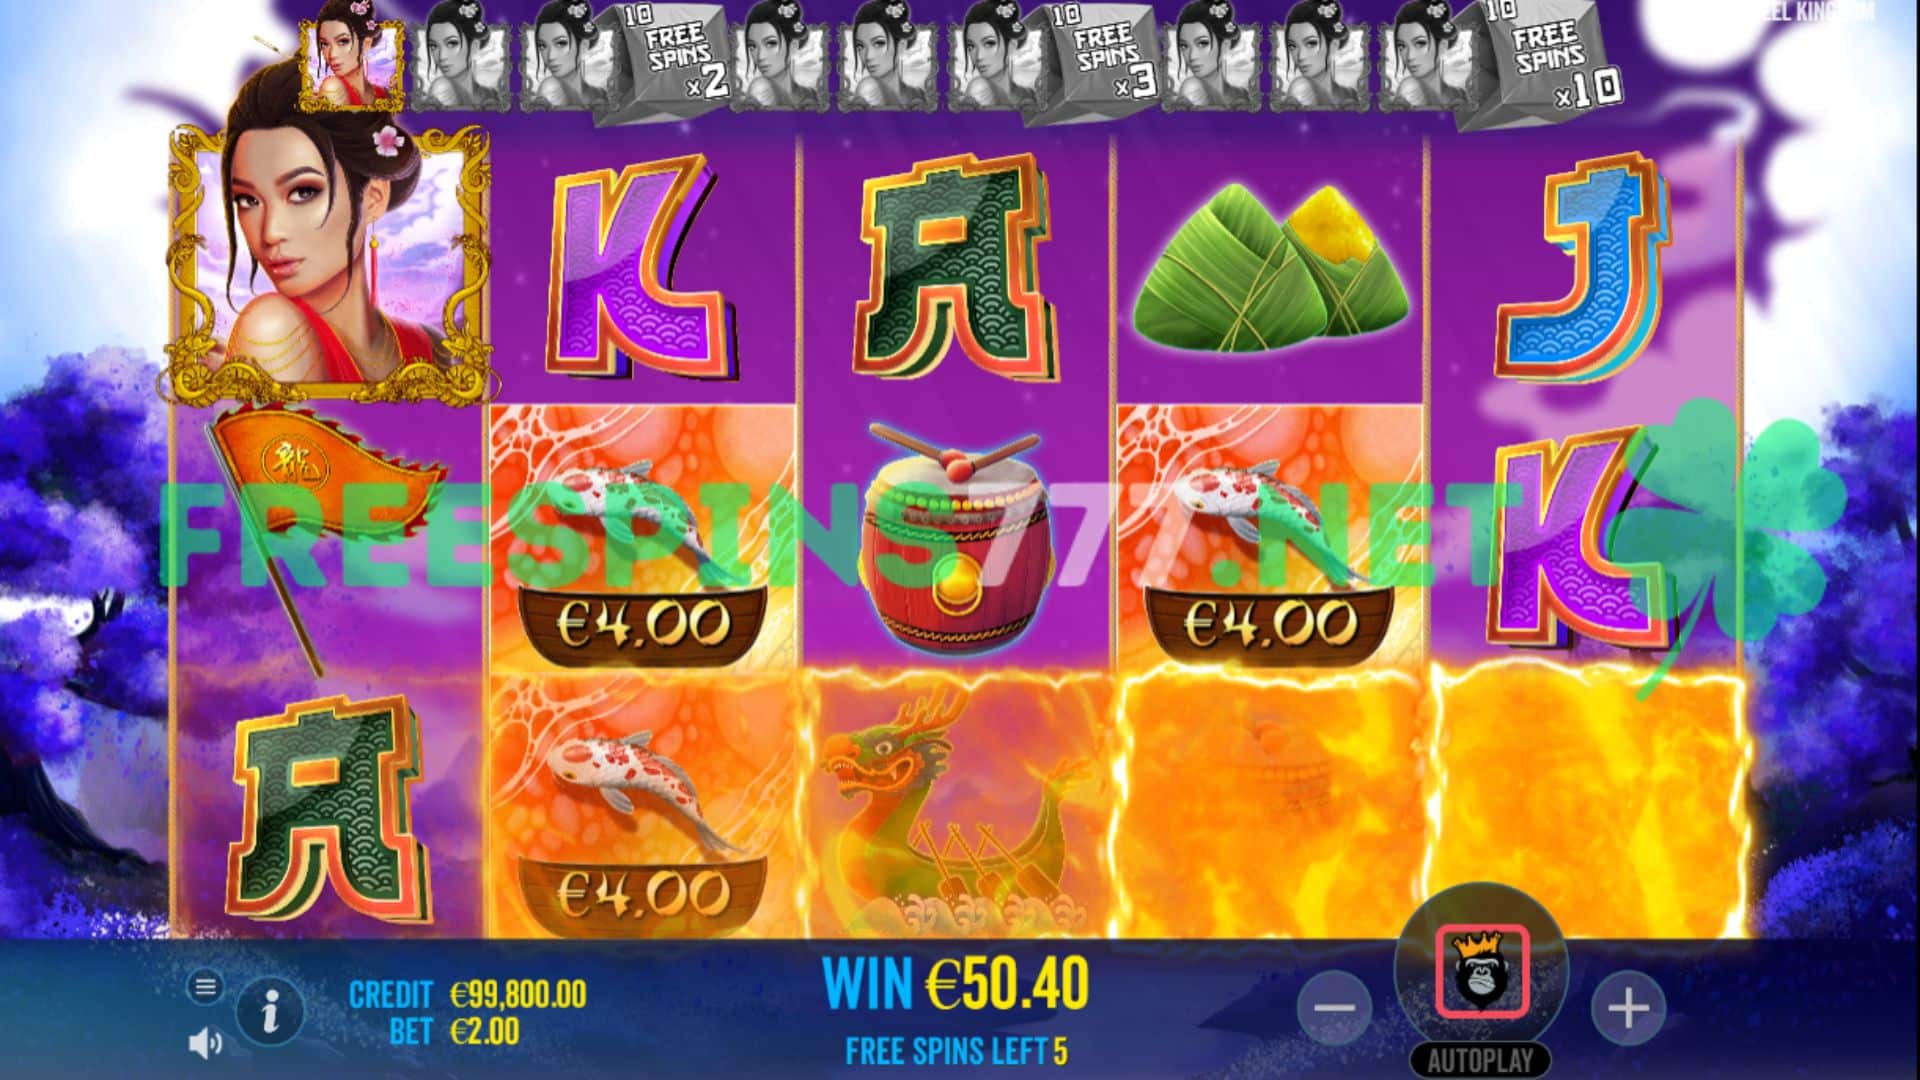 Floating Dragon Boat Festival free spins